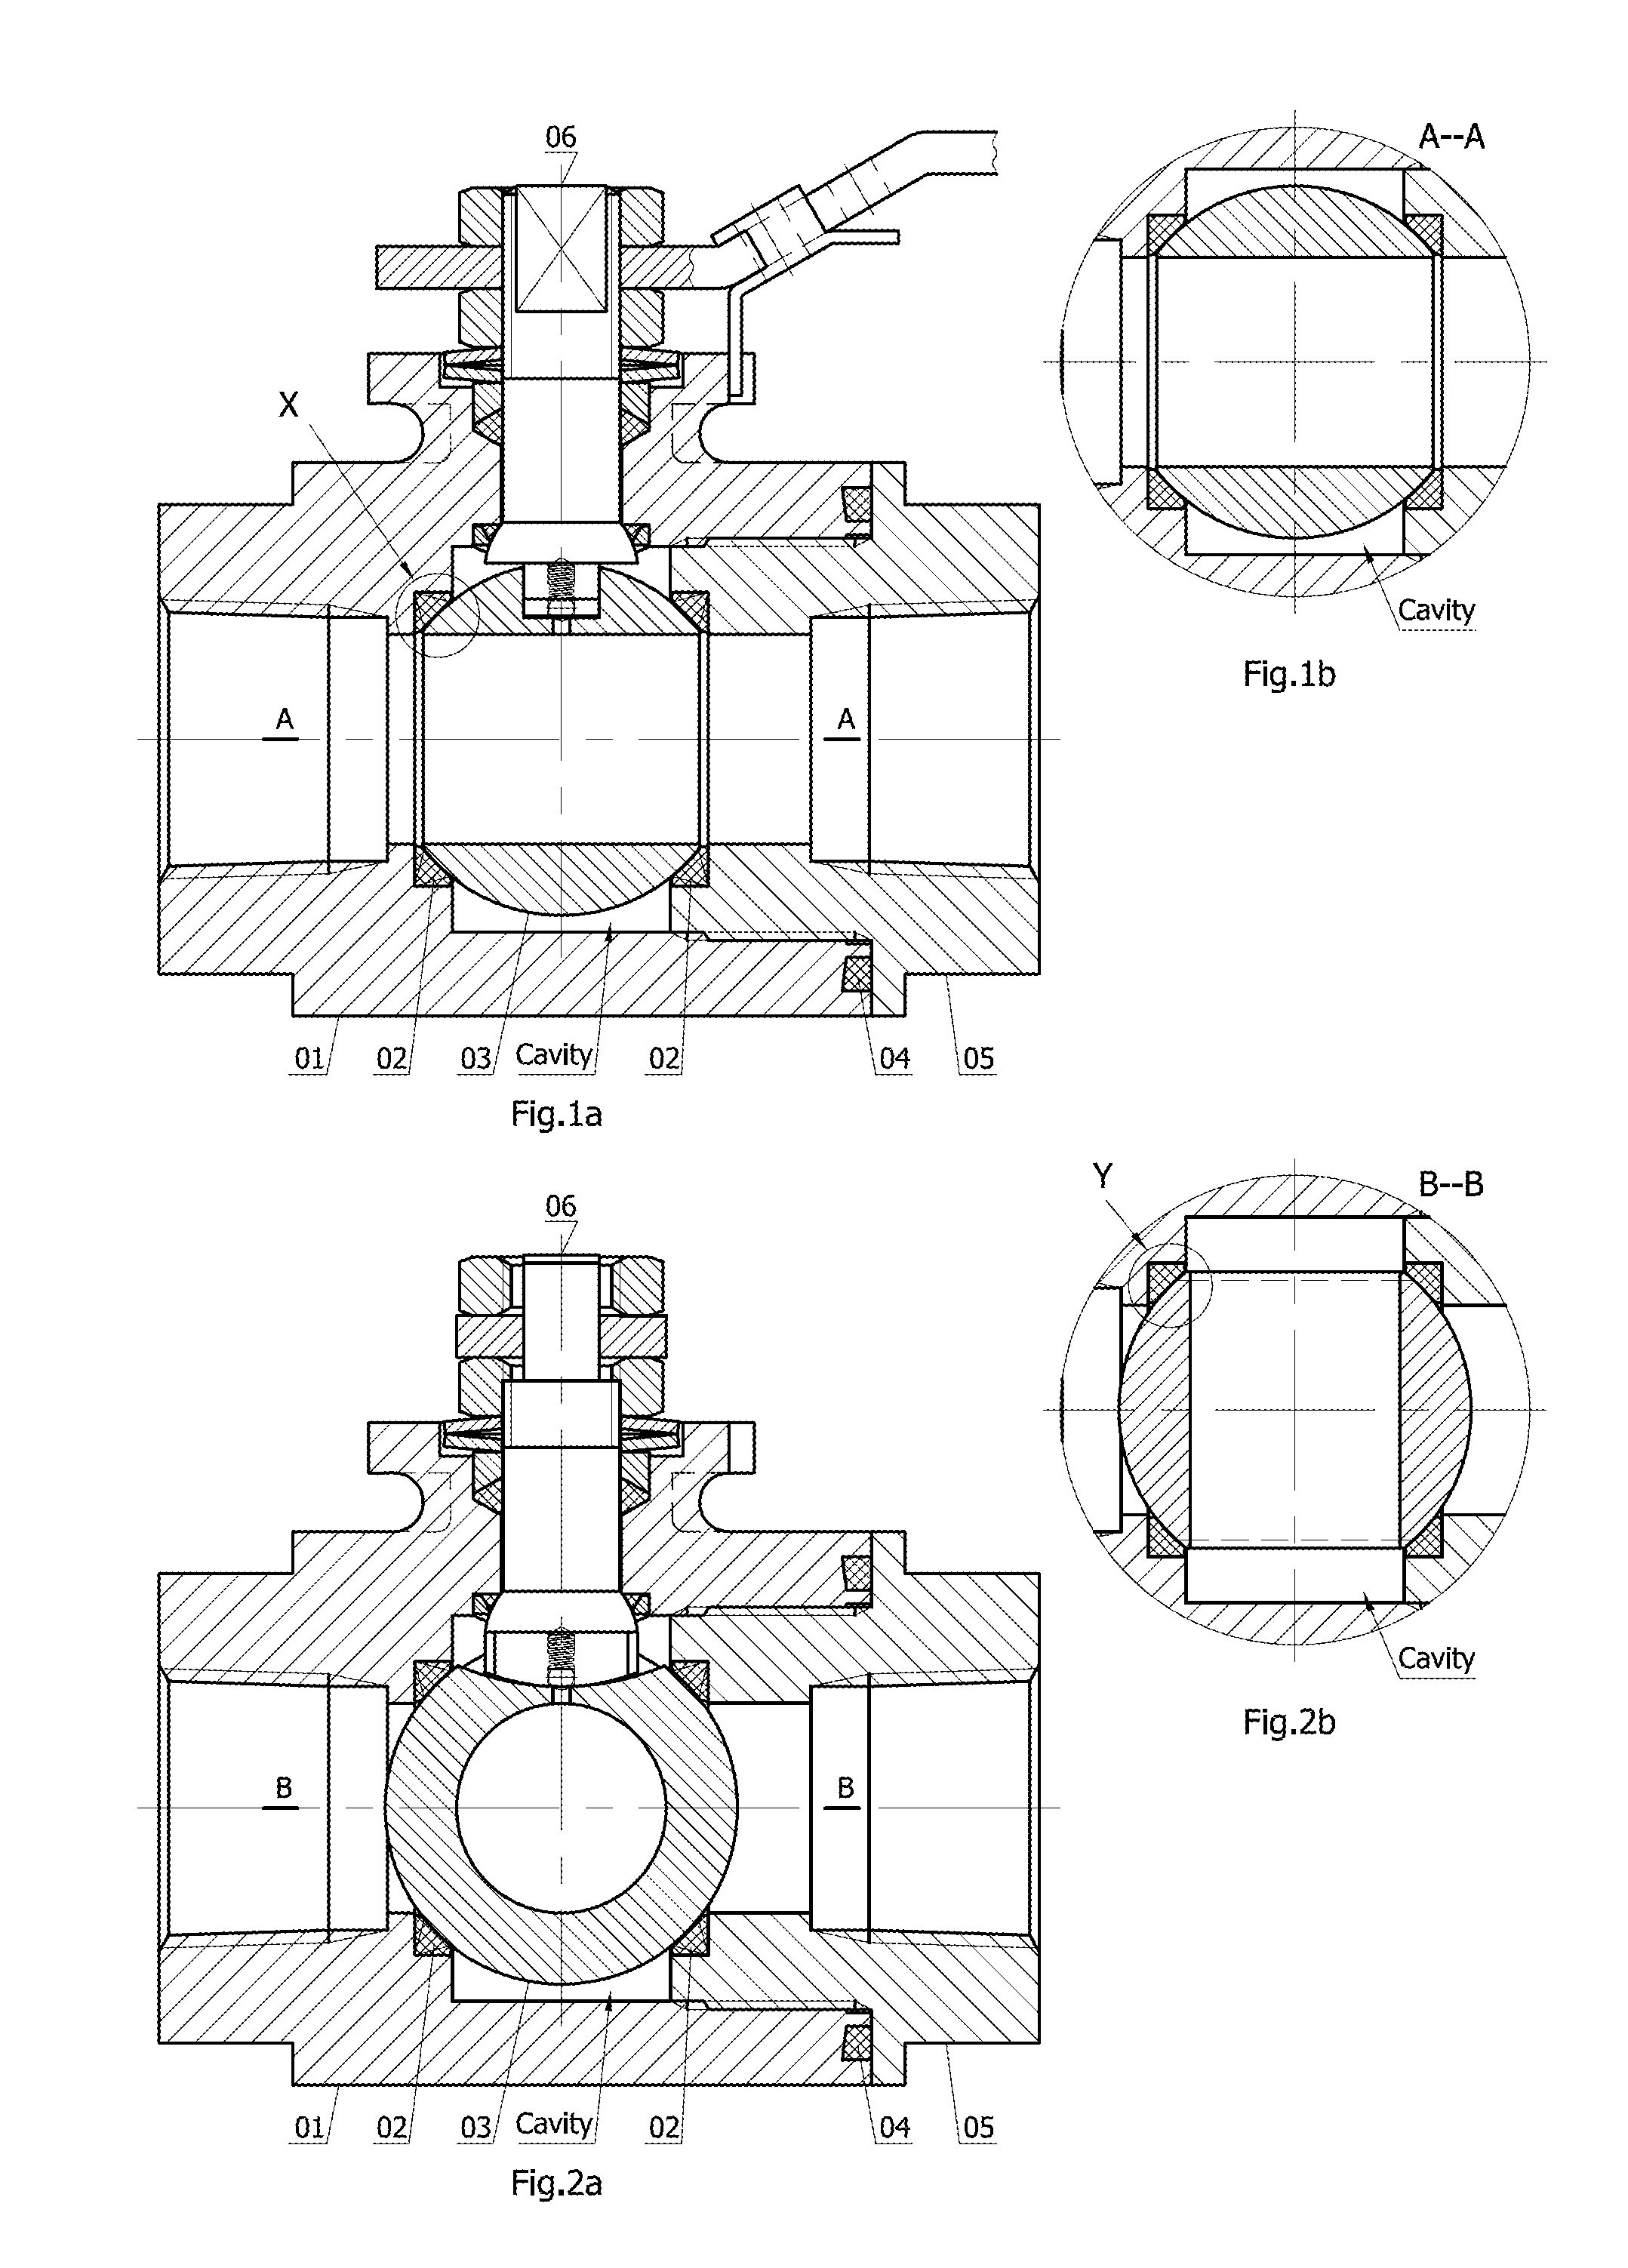 Ball valve seats and ball valves designed with equilateral triangle section methods